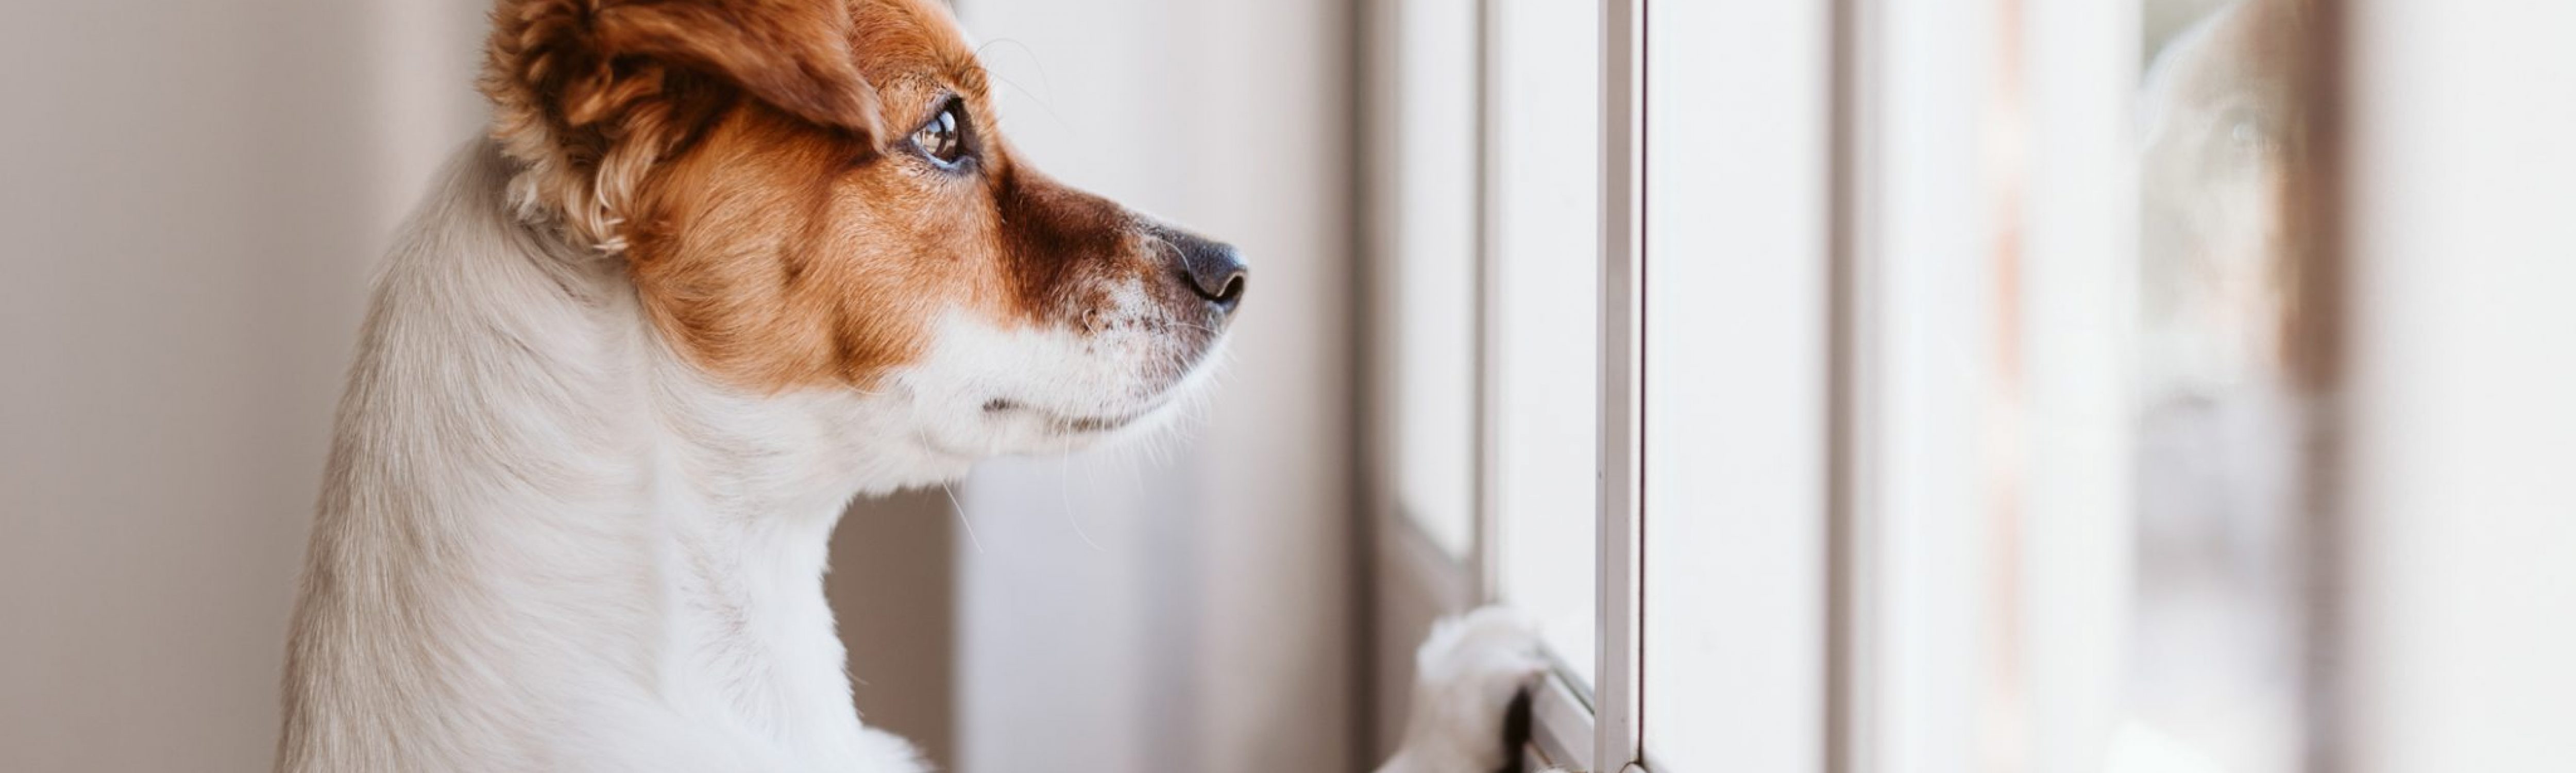 A white and brown dog propped up with his two front paws looking outside a window. Business Impact article on Why businesses must develop greater integrity.